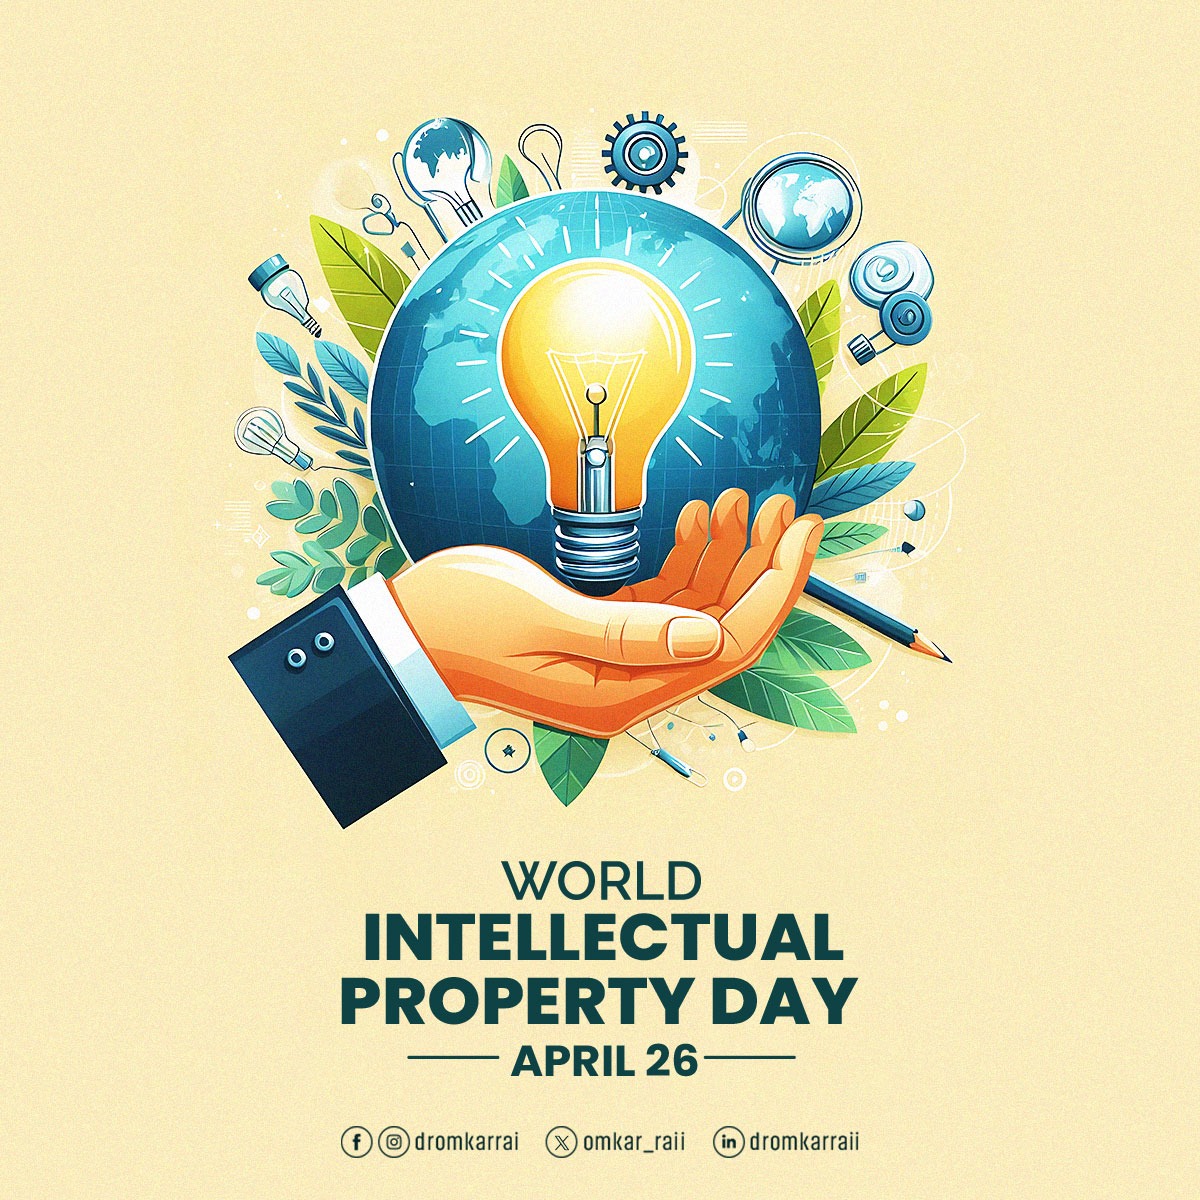 #WorldIntellectualPropertyDay is an opportunity to explore how IP encourages  the innovative and creative solutions that are crucial to building our common future. IP protection enables #startups to preserve & exercise unique products or services in the competitive marketplace.